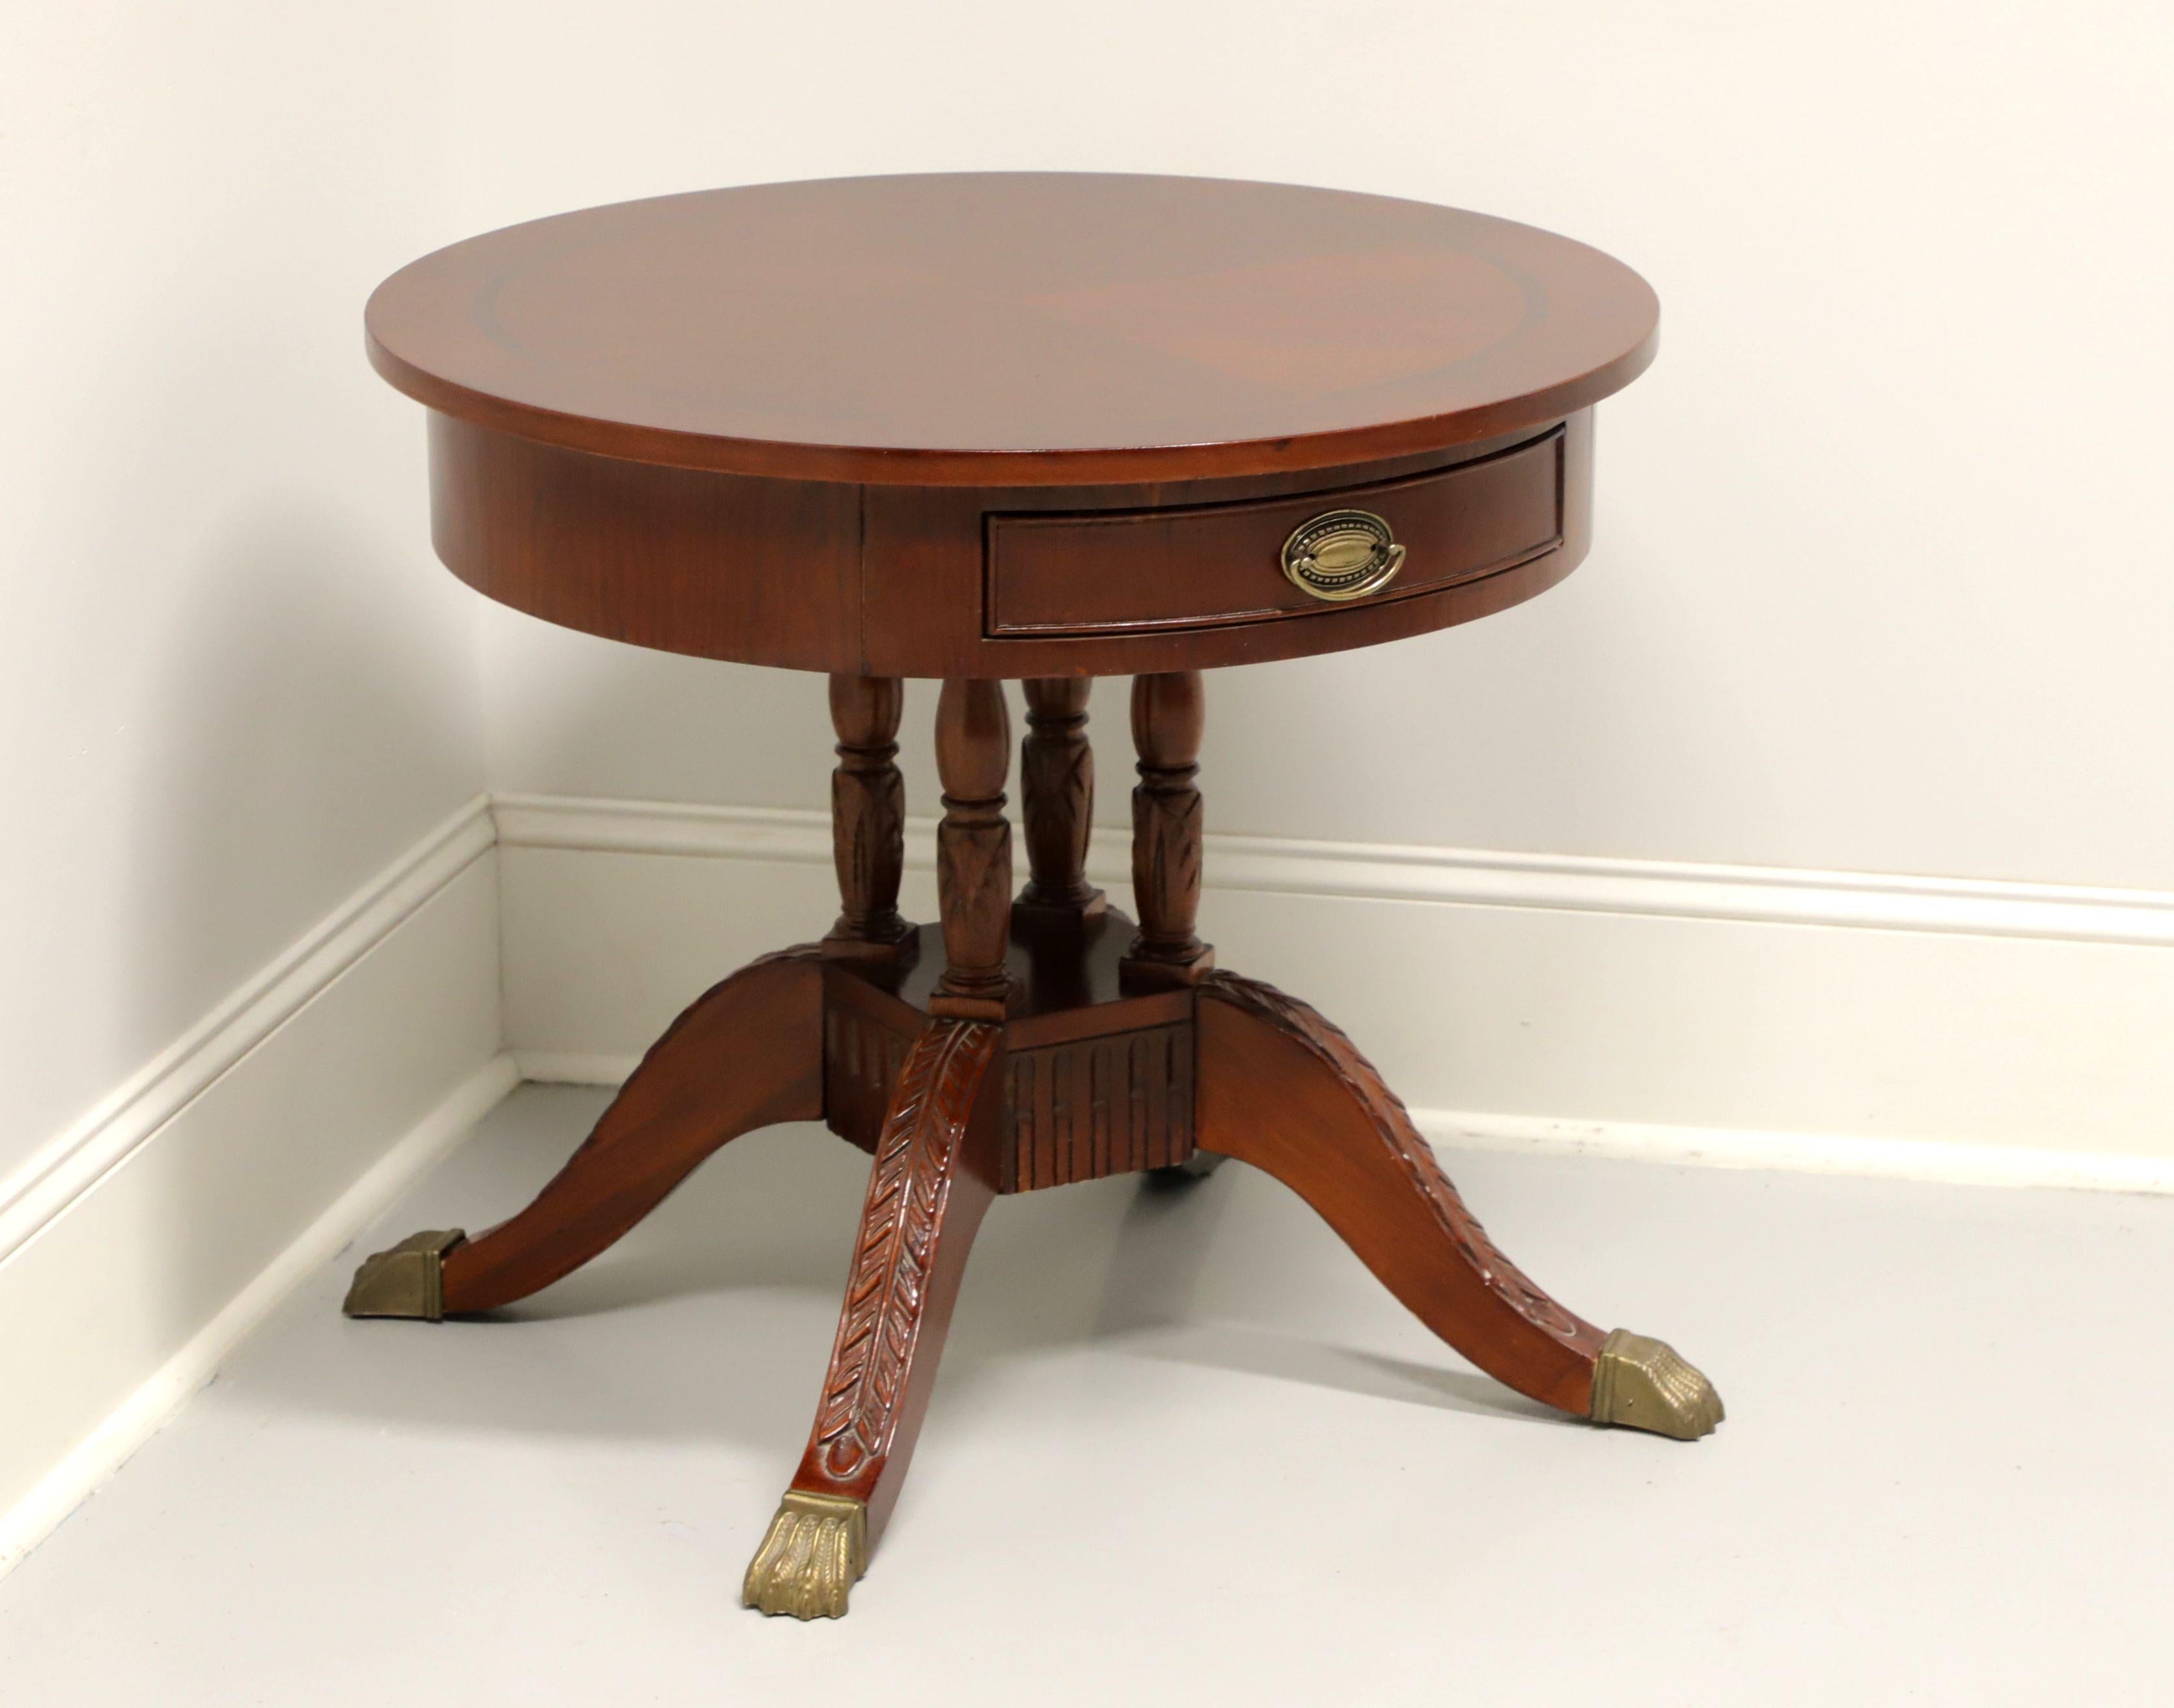 A Georgian style round drum table, unbranded. Cherry wood with banded & inlaid top, brass hardware, carved birdcage pedestal base and four acanthus leaf carved legs with brass paw caps. Features one small drawer. Made in Asia, in the late 20th